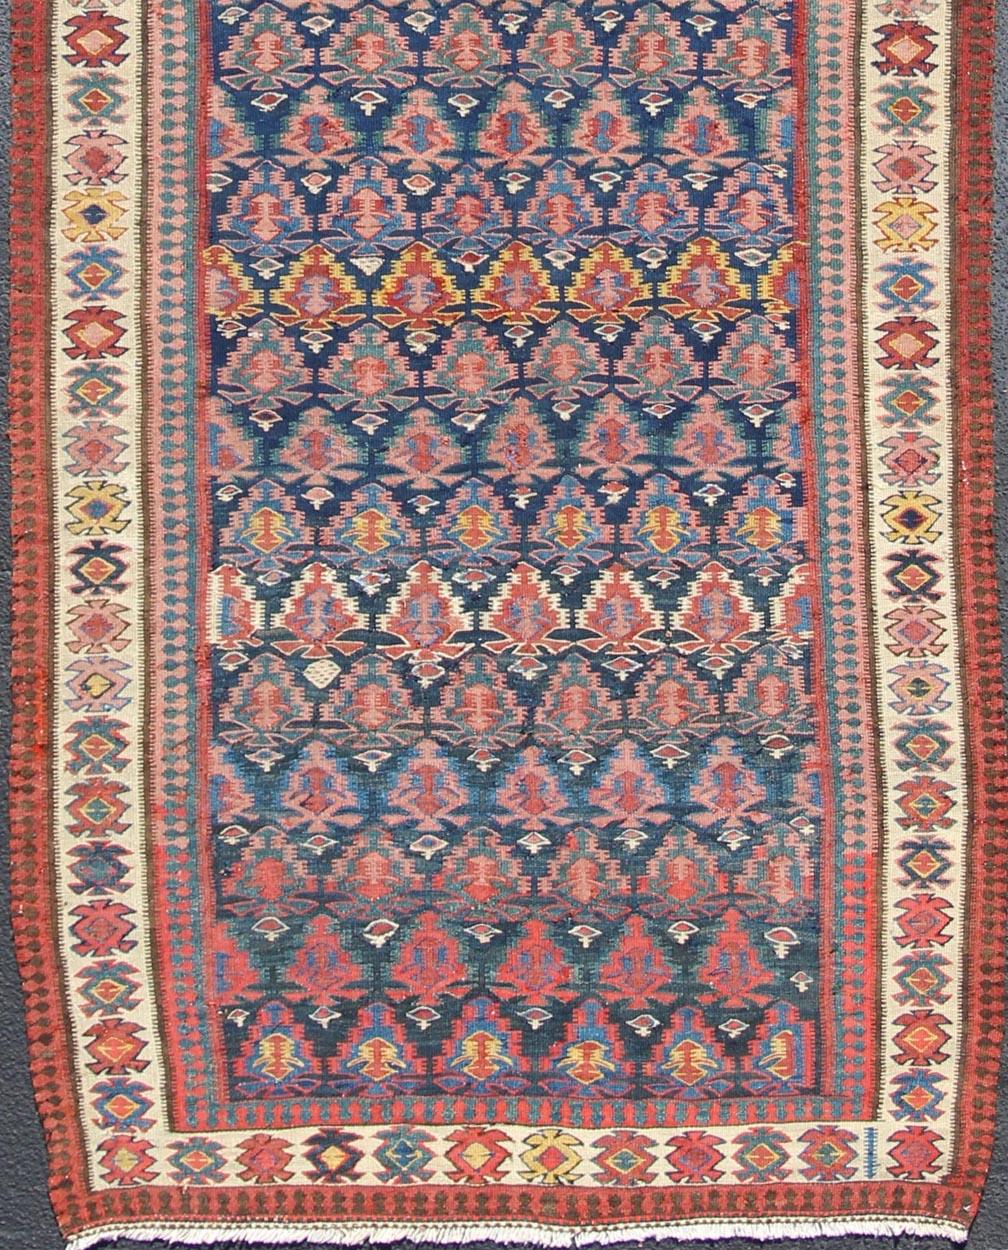 Vibrant runner with a beautiful blue color-toned, Geometric Design Kilim Runner antique Kilim Gallery from Persia, rug 19-0805, country of origin / type: Iran / Kilim, circa 1900

Featuring a Floral and paisley design, with complementary geometric